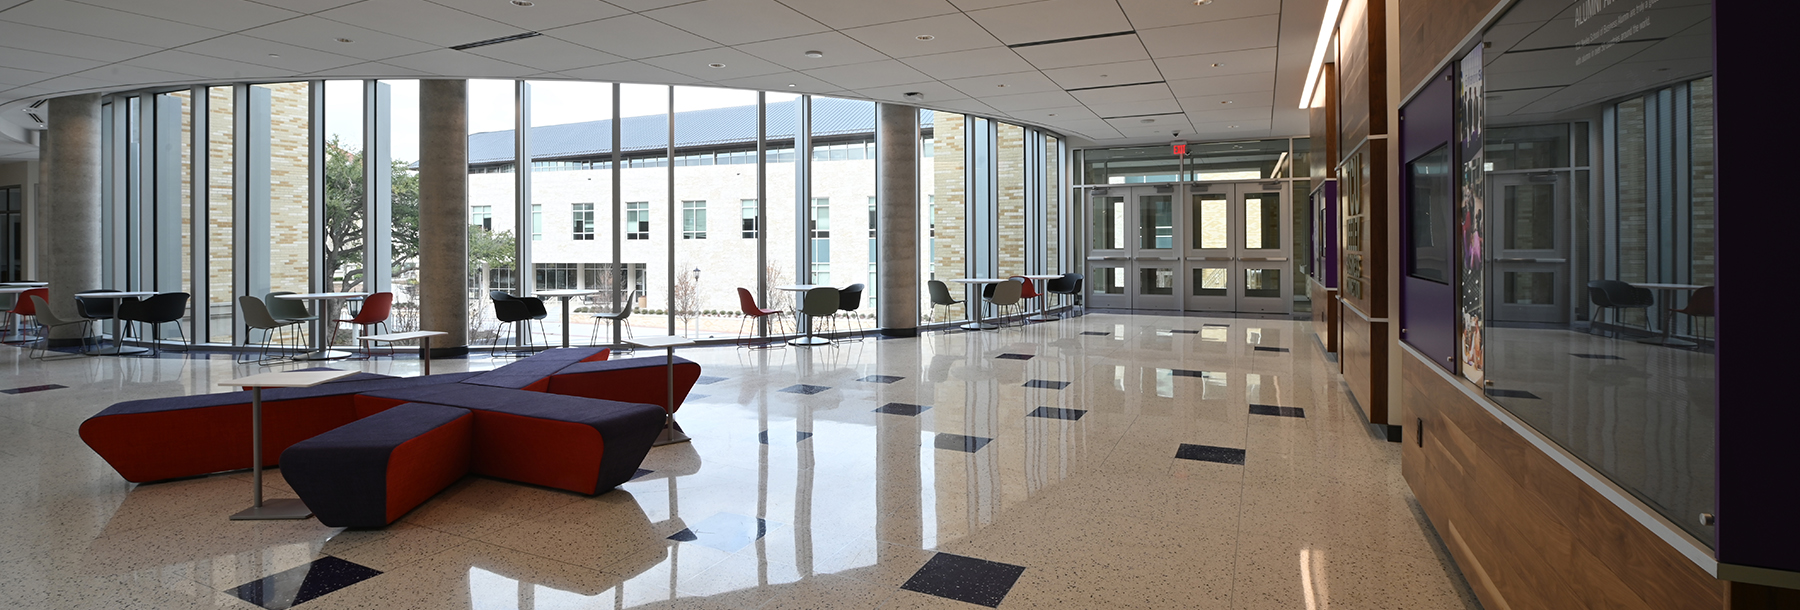 Section Image: Curved windows and seating in the Rogers Rotunda 